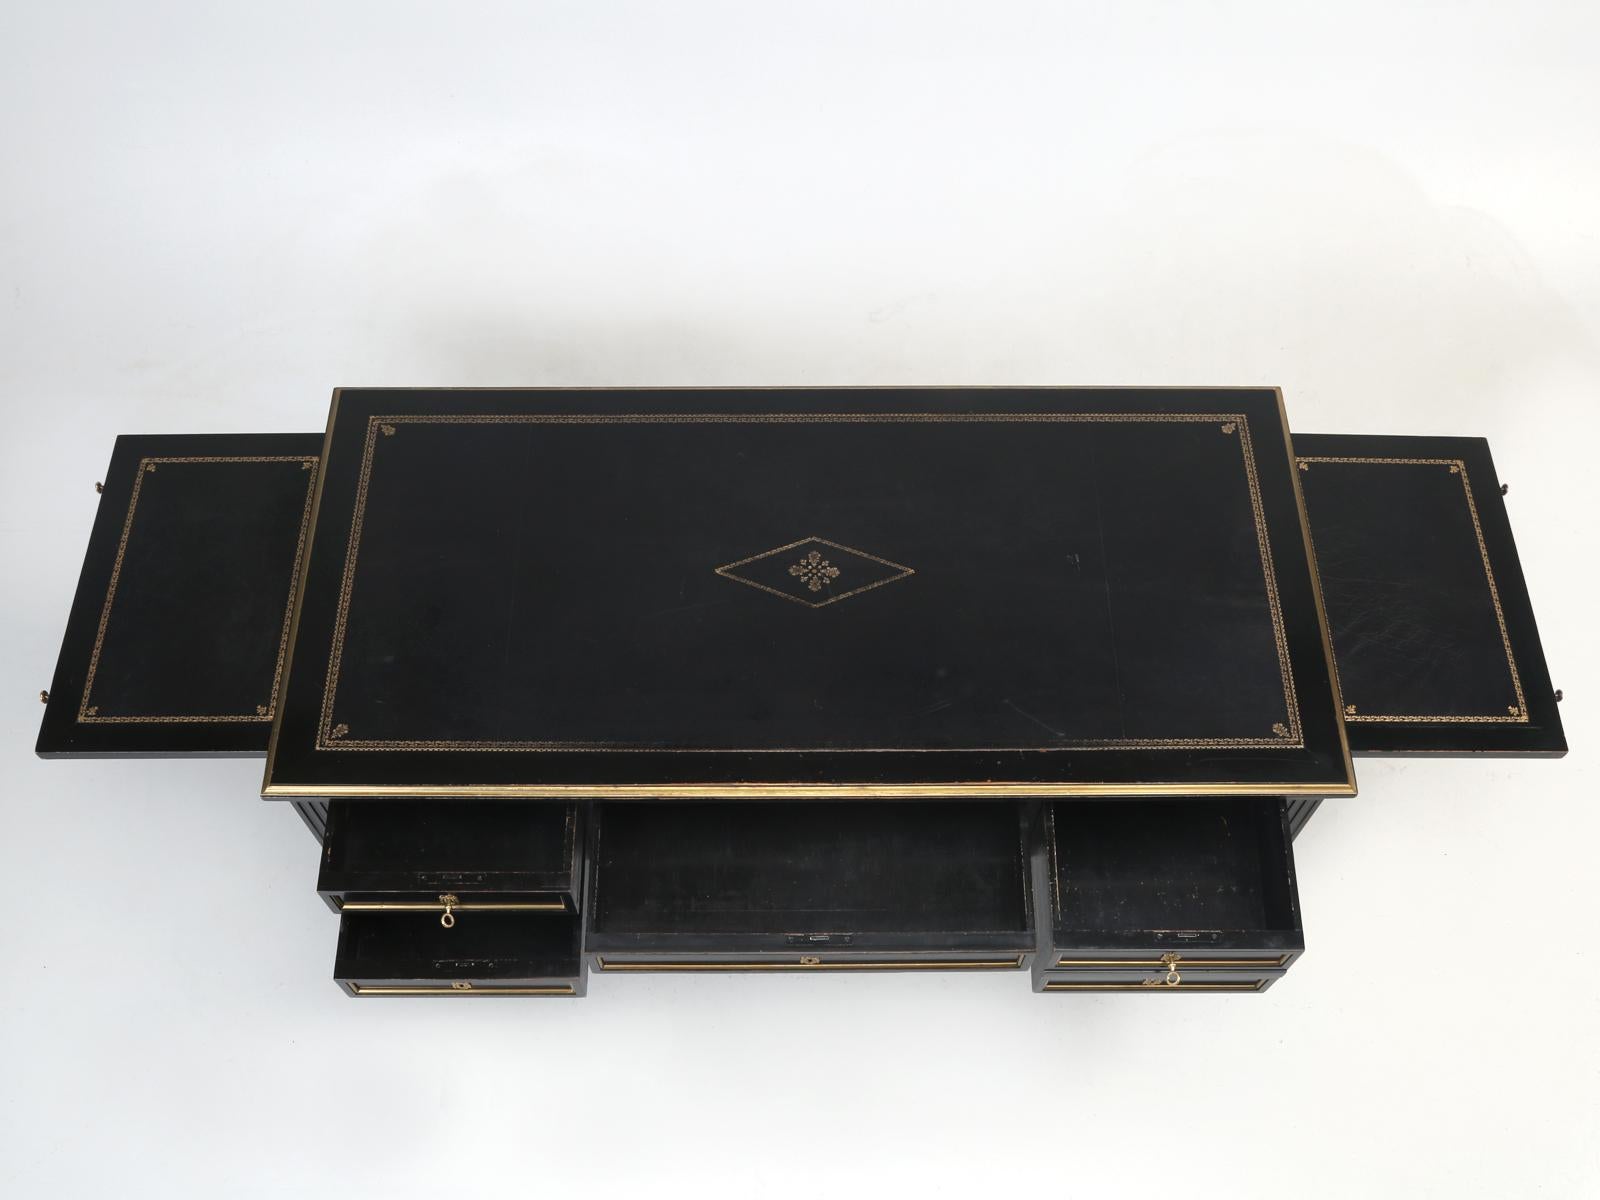 French Louis XVI style desk, in it’s original black lacquer finish, with a matching black leather top, that was tastefully adorned with gold trim. Difficult to determine, if this black lacquer French Louis XVI desk was made before the great war or